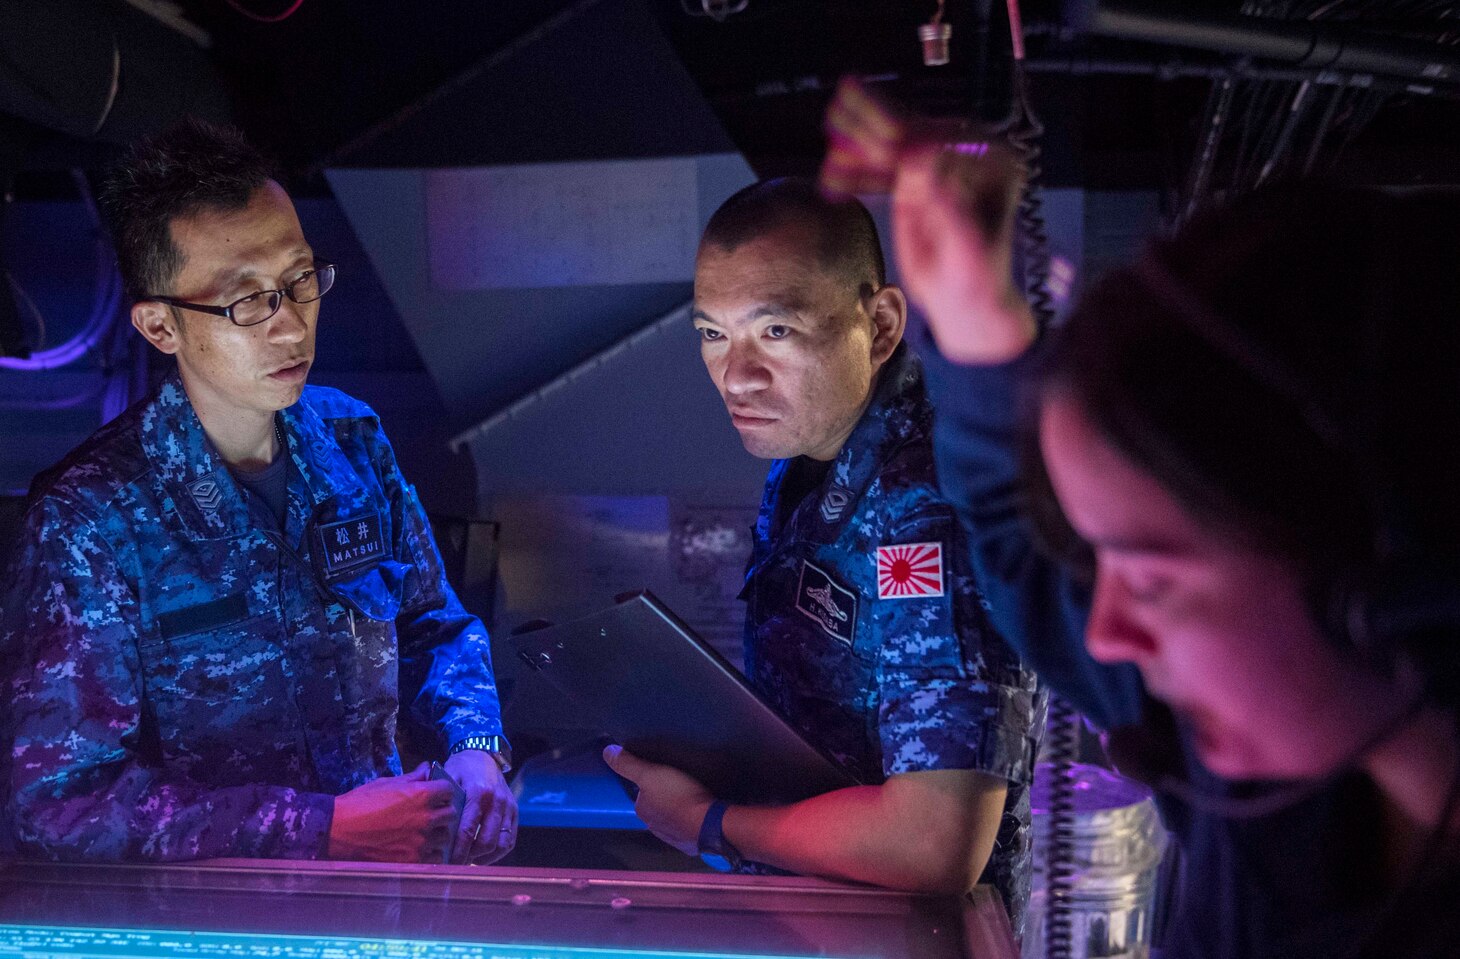 WATERS SOUTH OF JAPAN (Dec. 4, 2018) Japan Maritime Self-Defense Force (JMSDF) sailors assigned to the JMSDF destroyer JS Hyuga (DDH-181), observe as an anti-submarine scenario occurs in the combat information center aboard the Arleigh Burke-class guided-missile destroyer USS Benfold (DDG 65). Benfold is forward-deployed to the U.S. 7th Fleet area of operations in support of security and stability in the Indo-Pacific region.